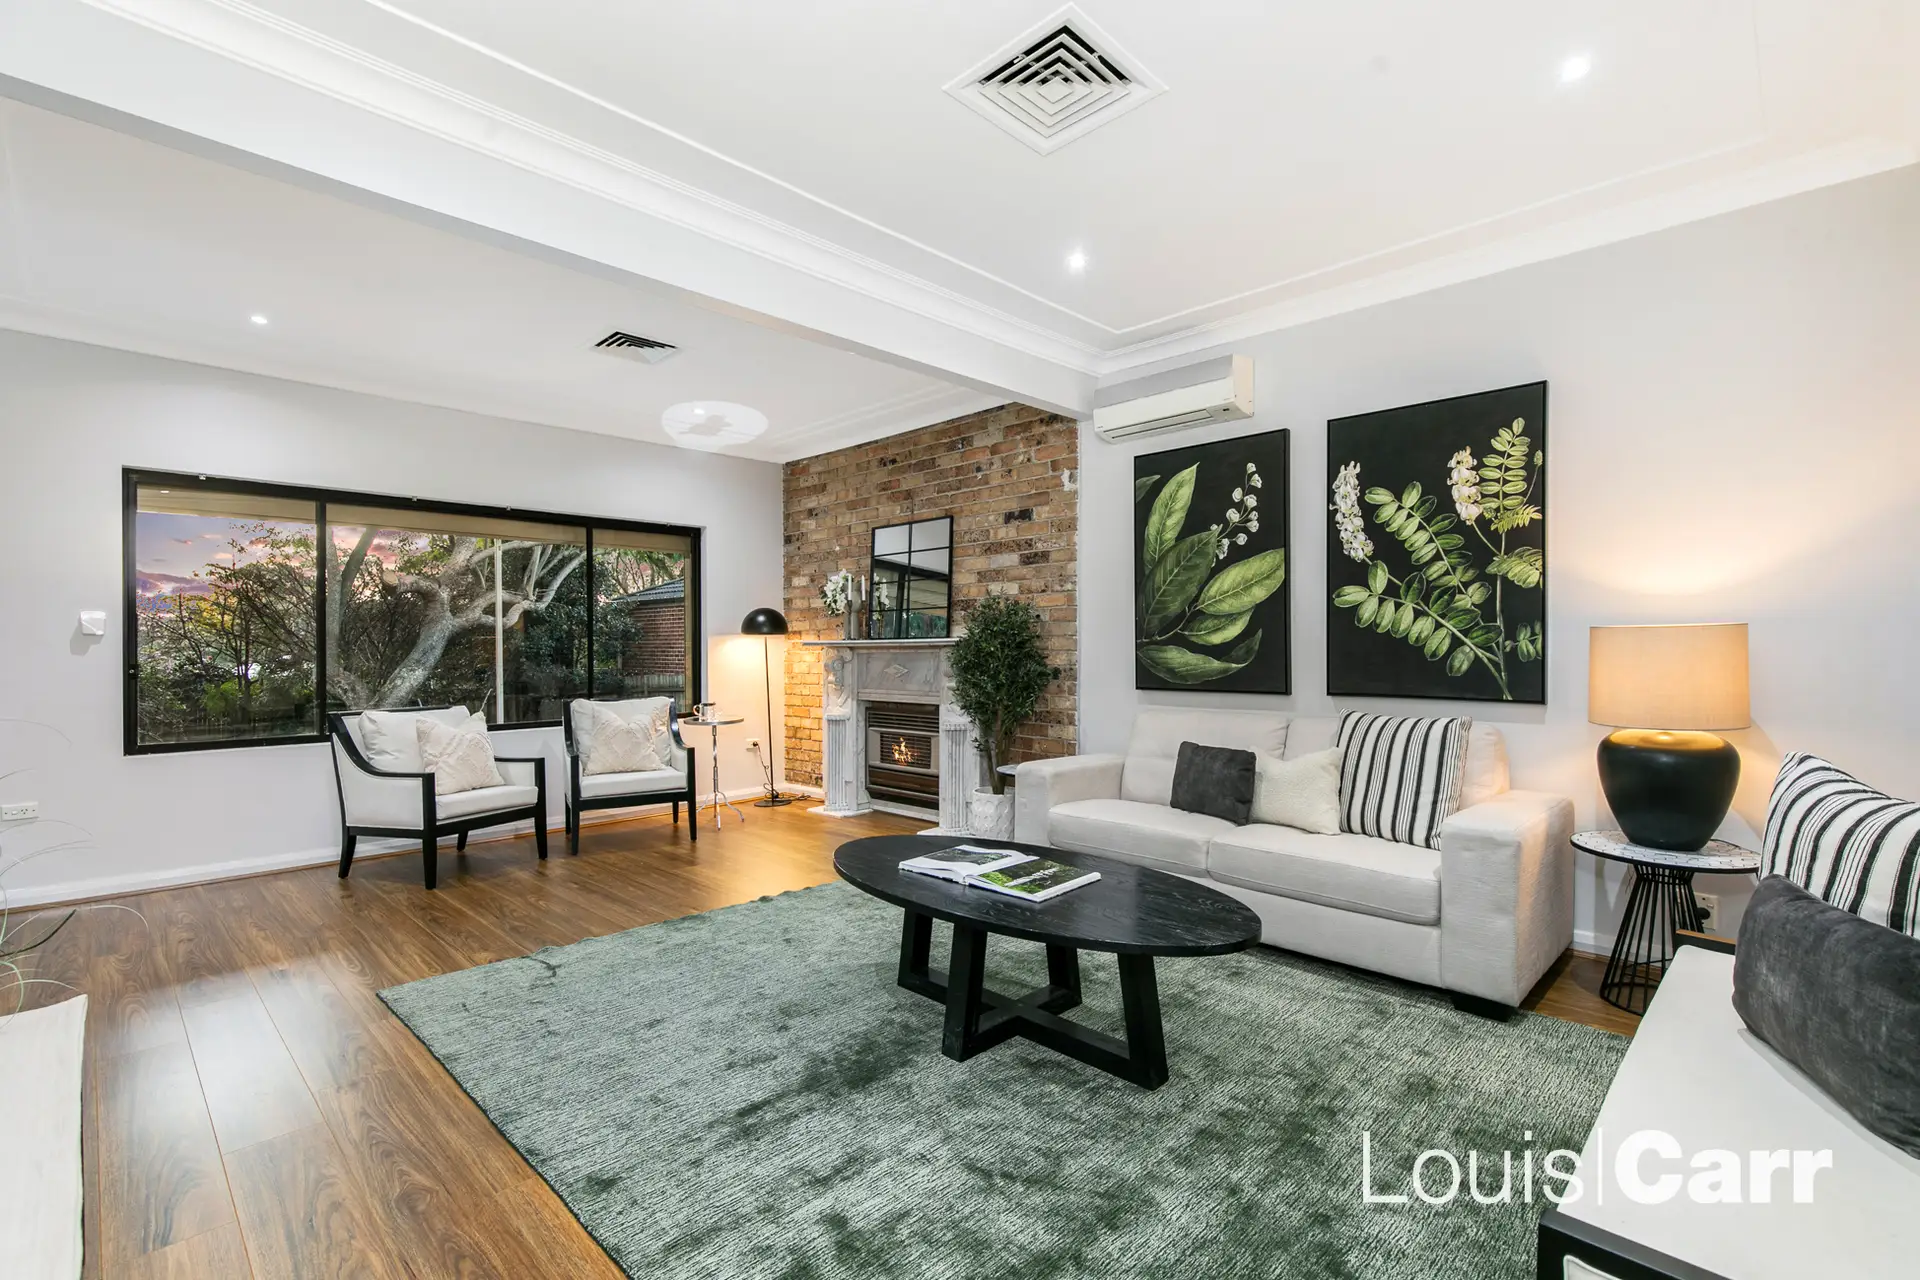 Photo #4: 526 Pennant Hills Road, West Pennant Hills - Sold by Louis Carr Real Estate